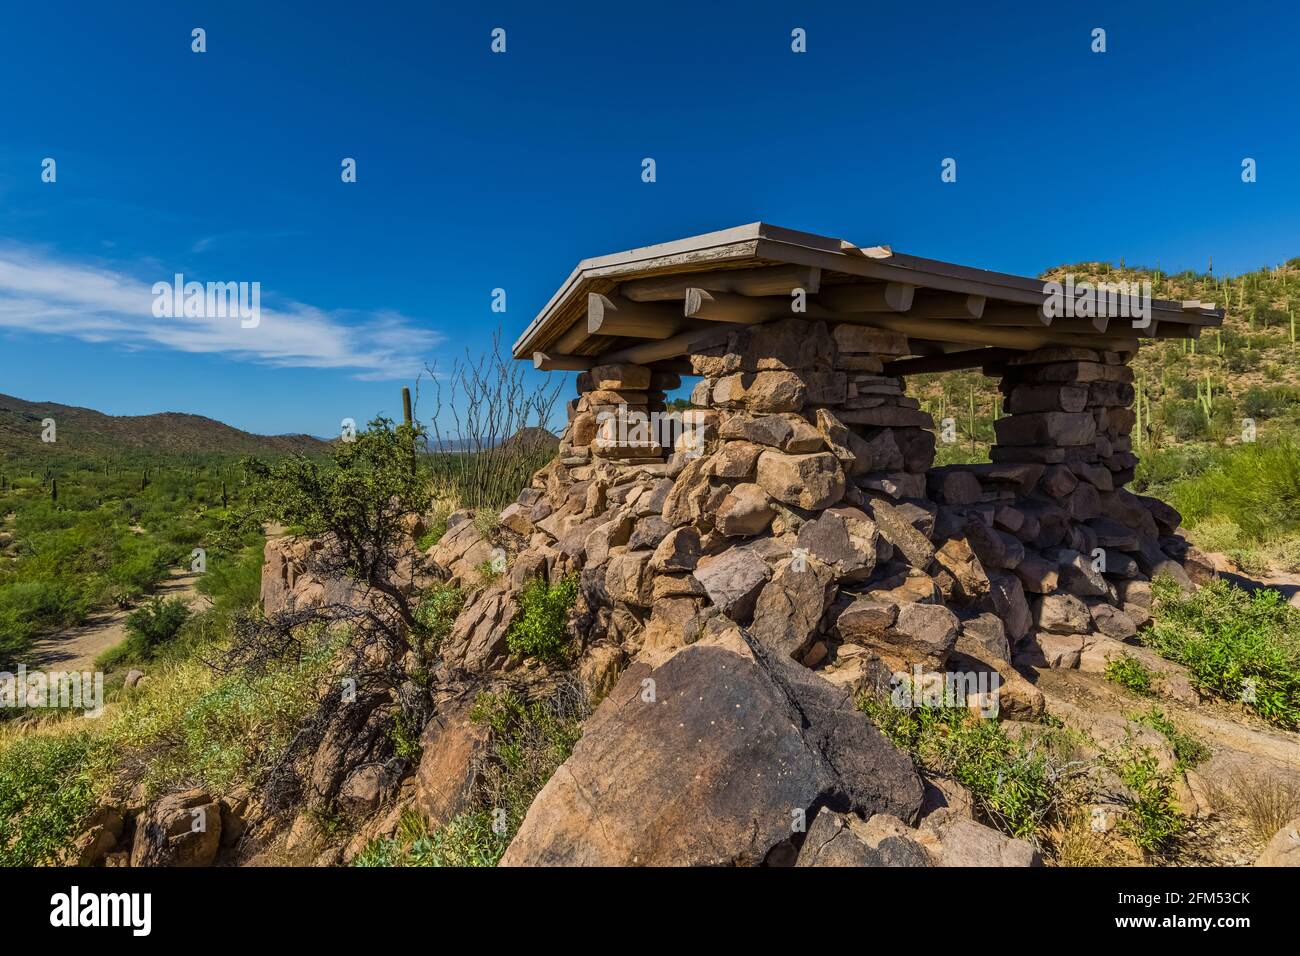 Ramada in the Ez-Kim-In-Zin Picnic Area built by the Civilian Conservation Corps during the Great Depression, Saguaro National Park, Tucson Mountain D Stock Photo